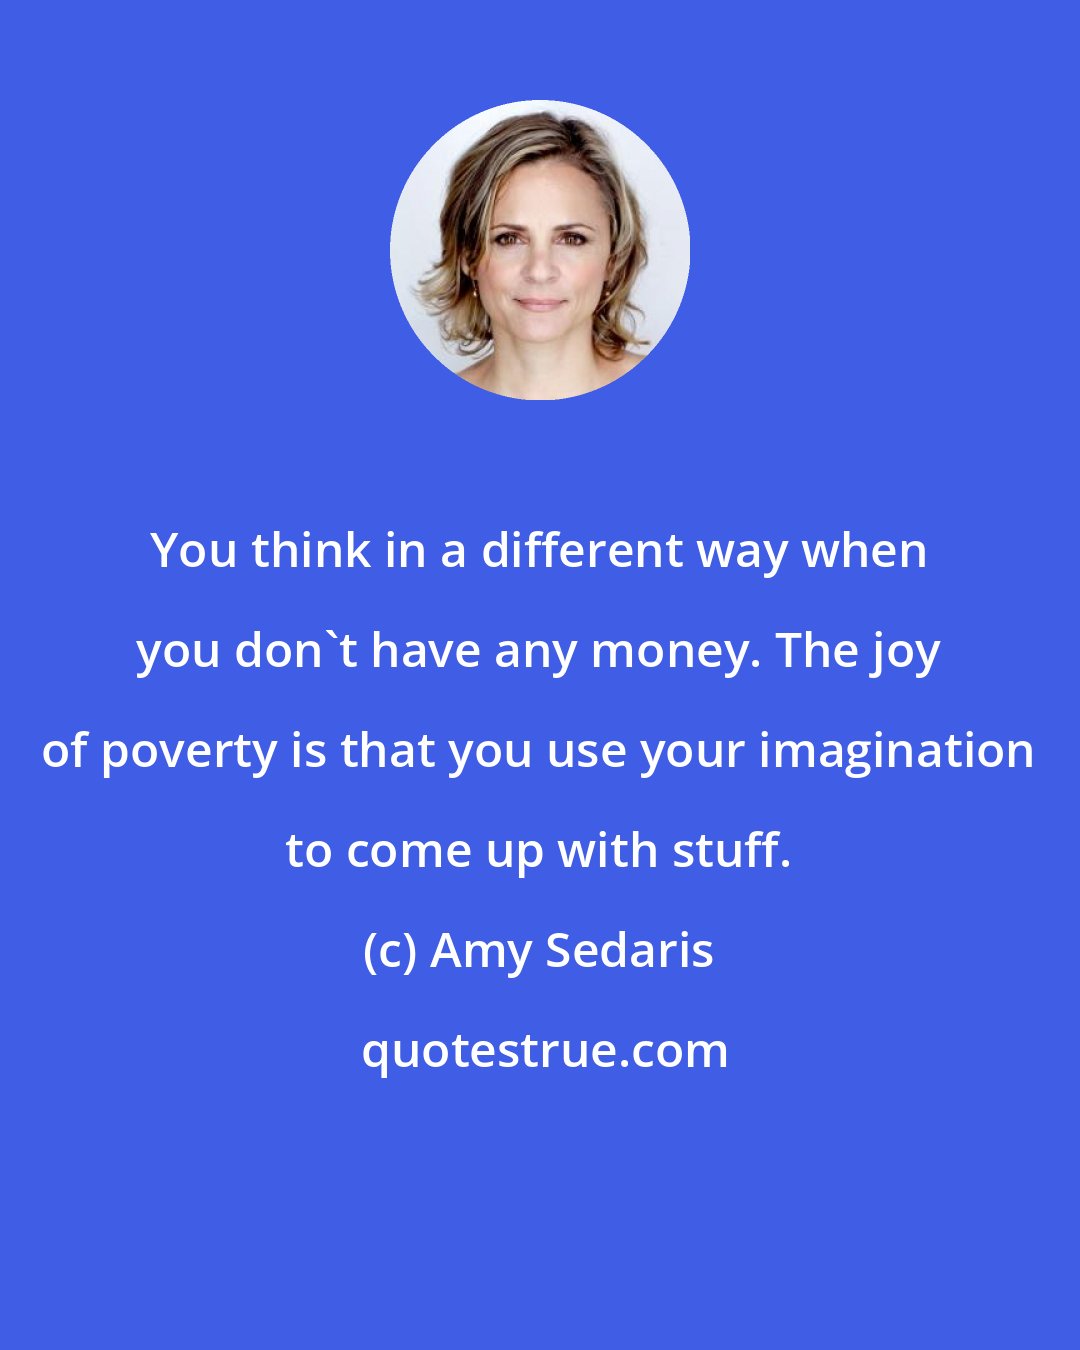 Amy Sedaris: You think in a different way when you don't have any money. The joy of poverty is that you use your imagination to come up with stuff.